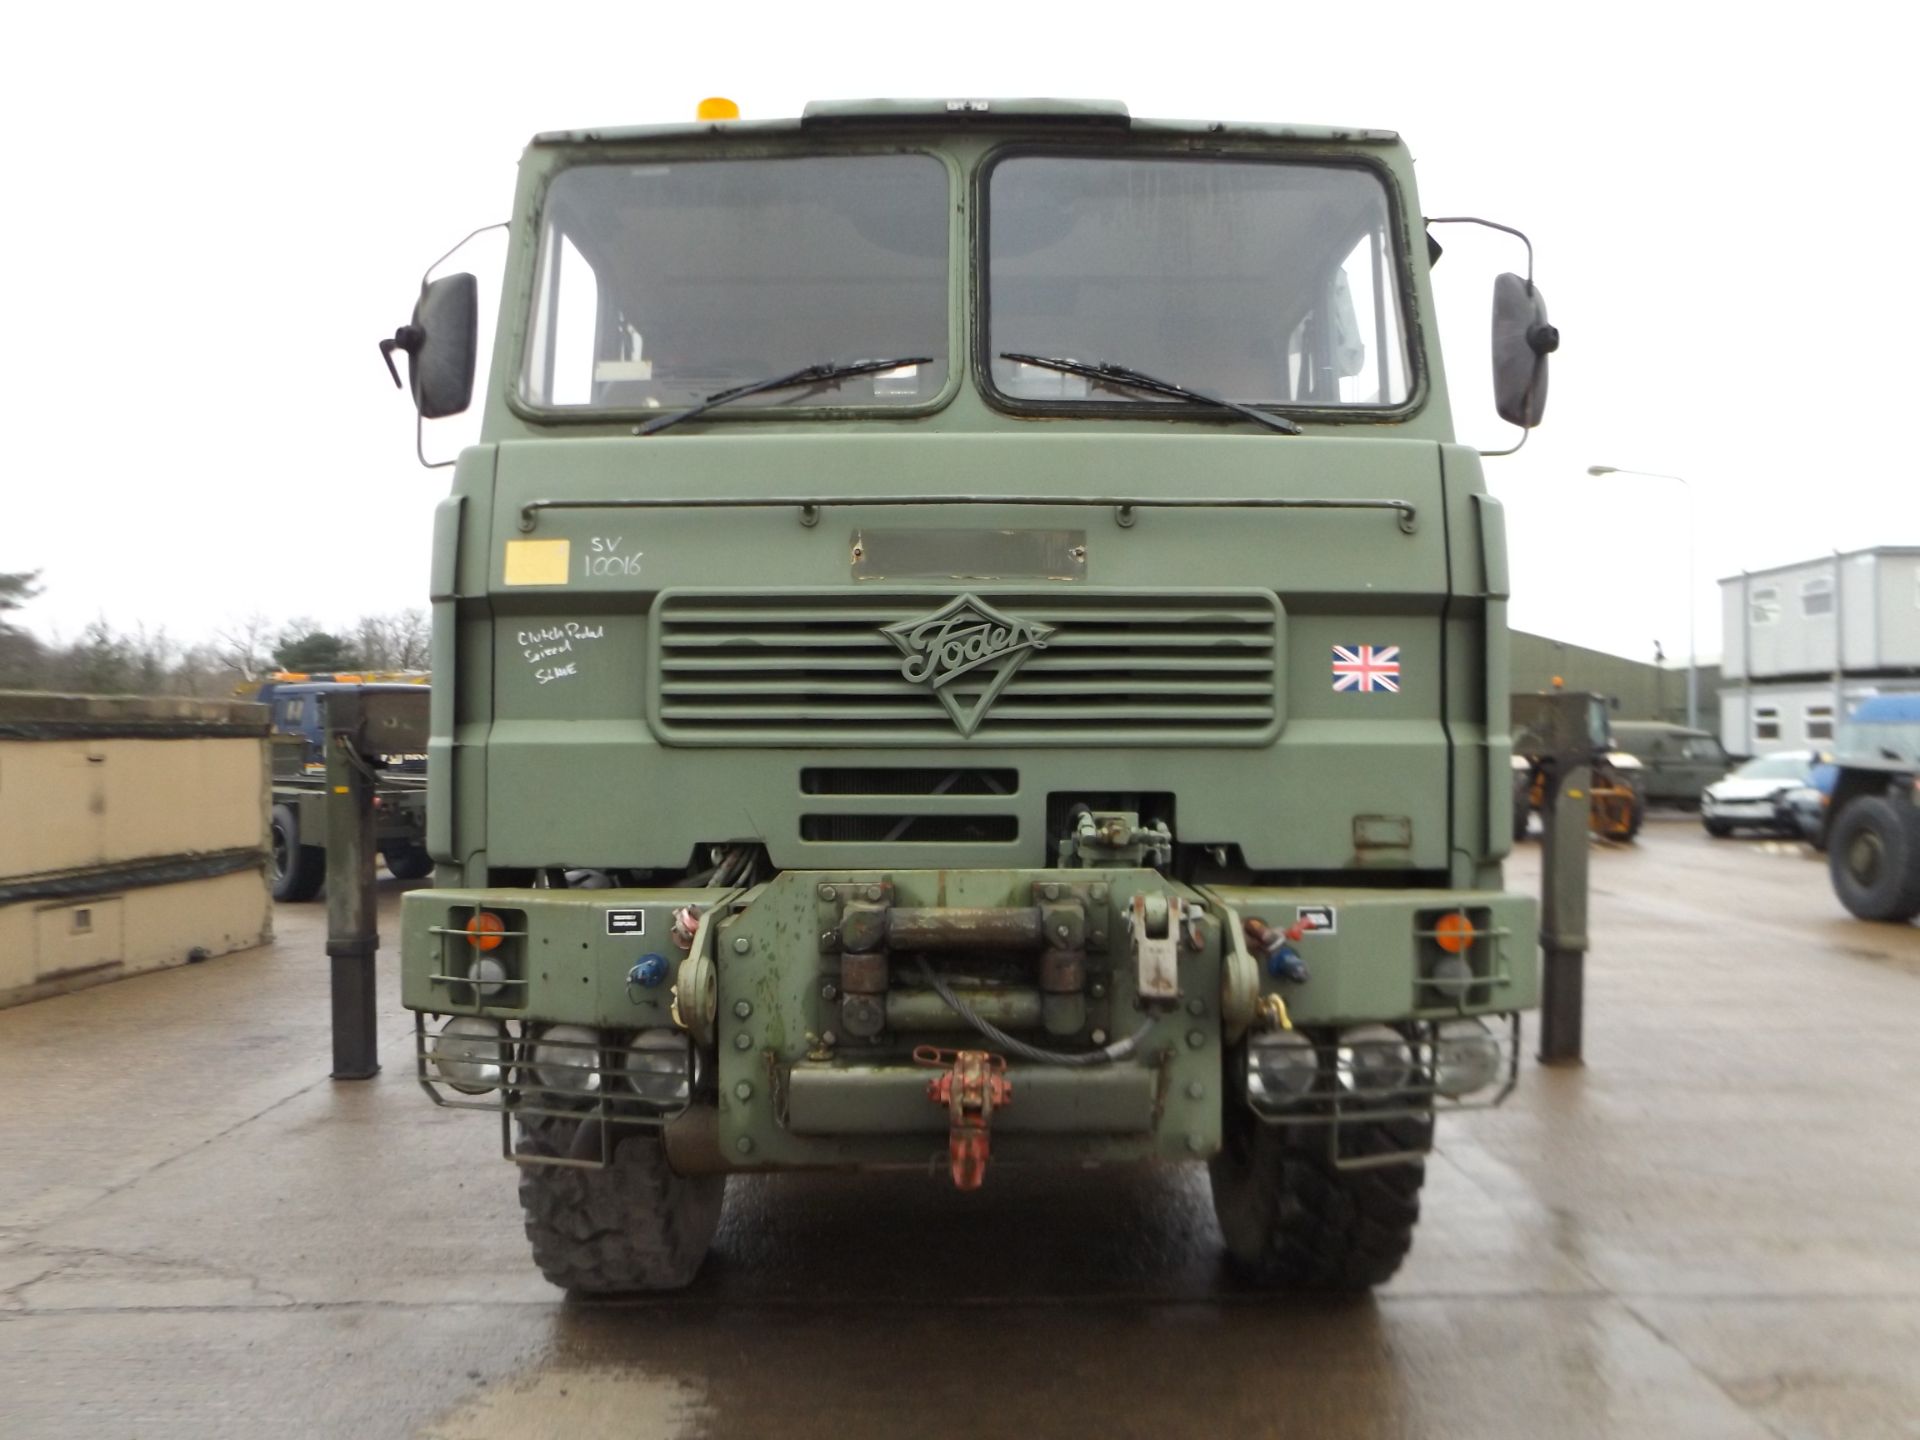 Foden 6x6 Recovery Vehicle which is Complete with a Remote and some EKA Recovery Tools - Image 2 of 23